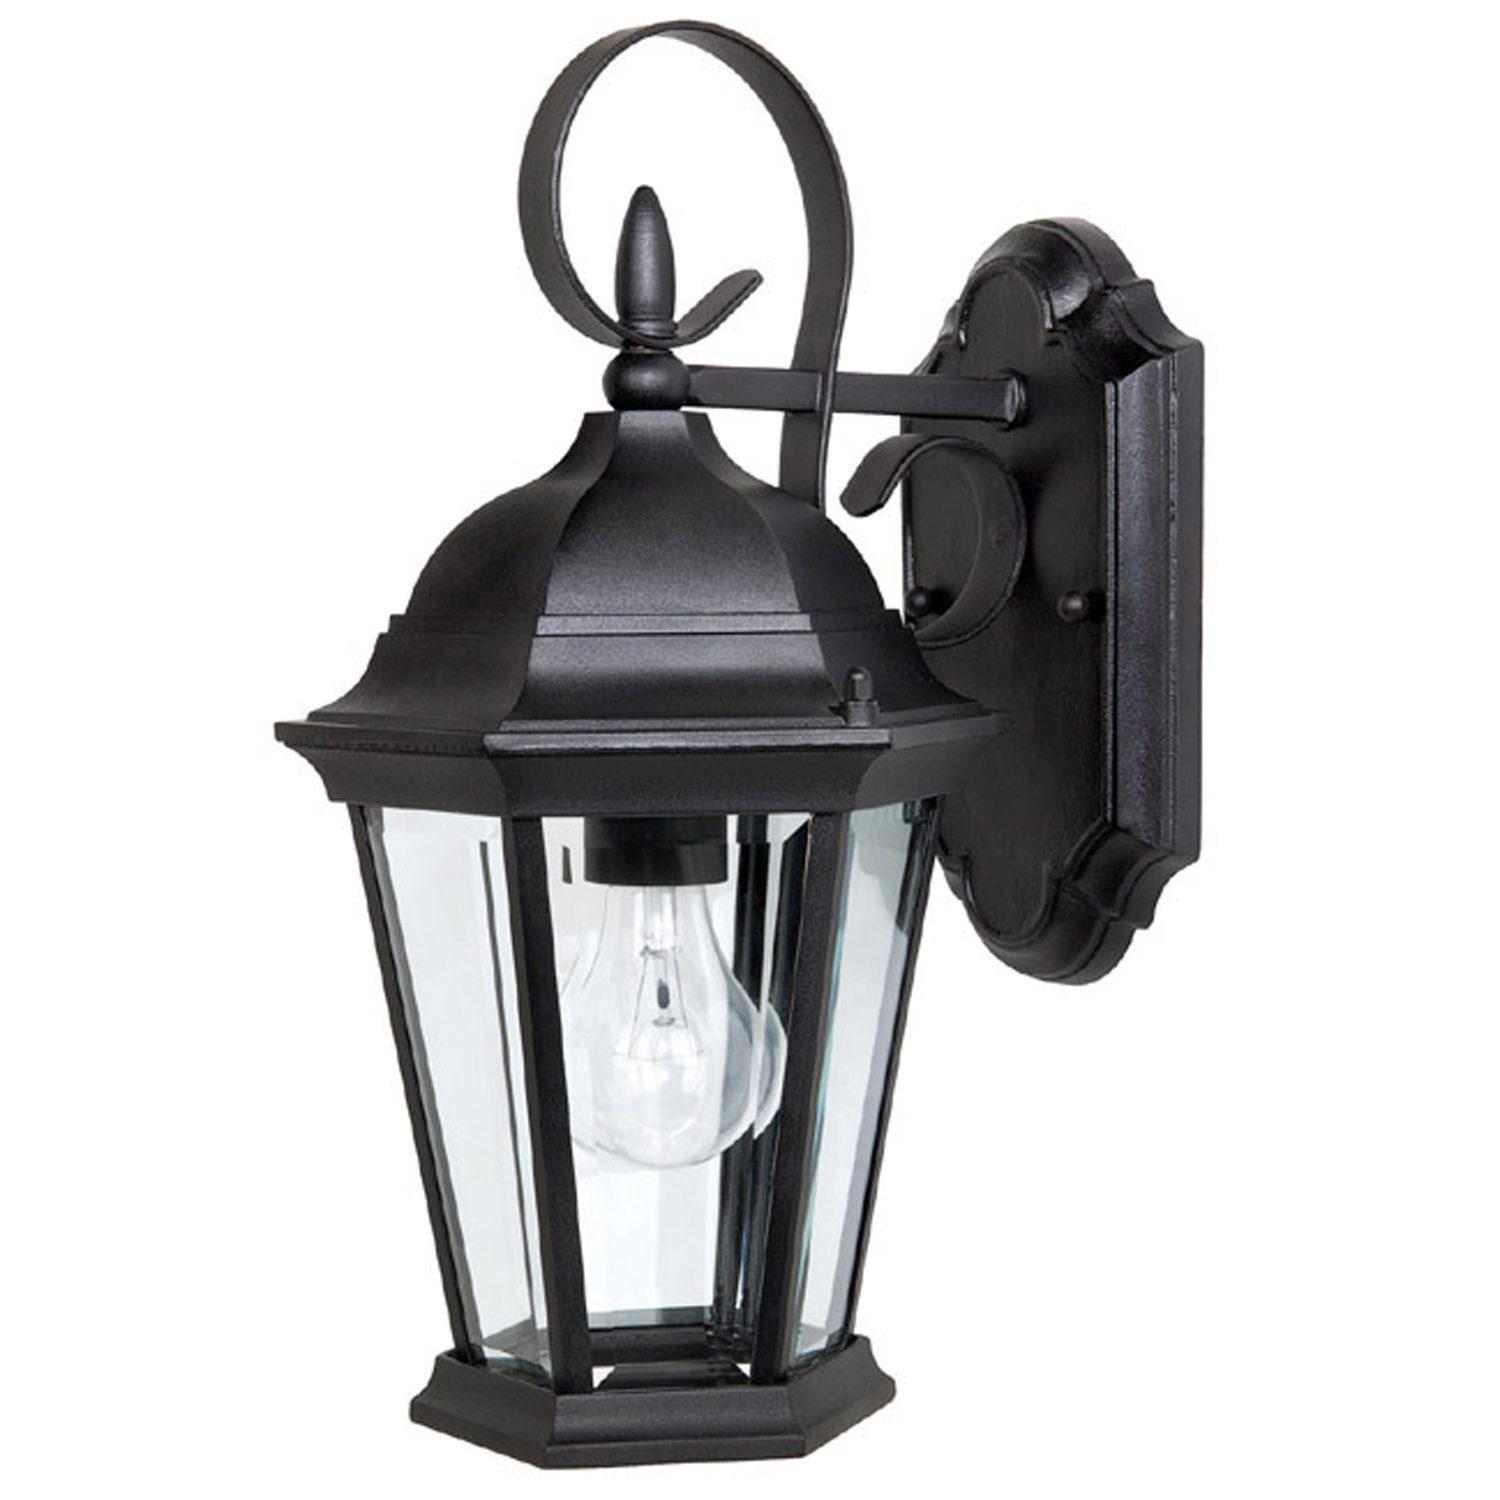 Capital Lighting 9726 Carriage House 1 Light Outdoor Wall Sconce,